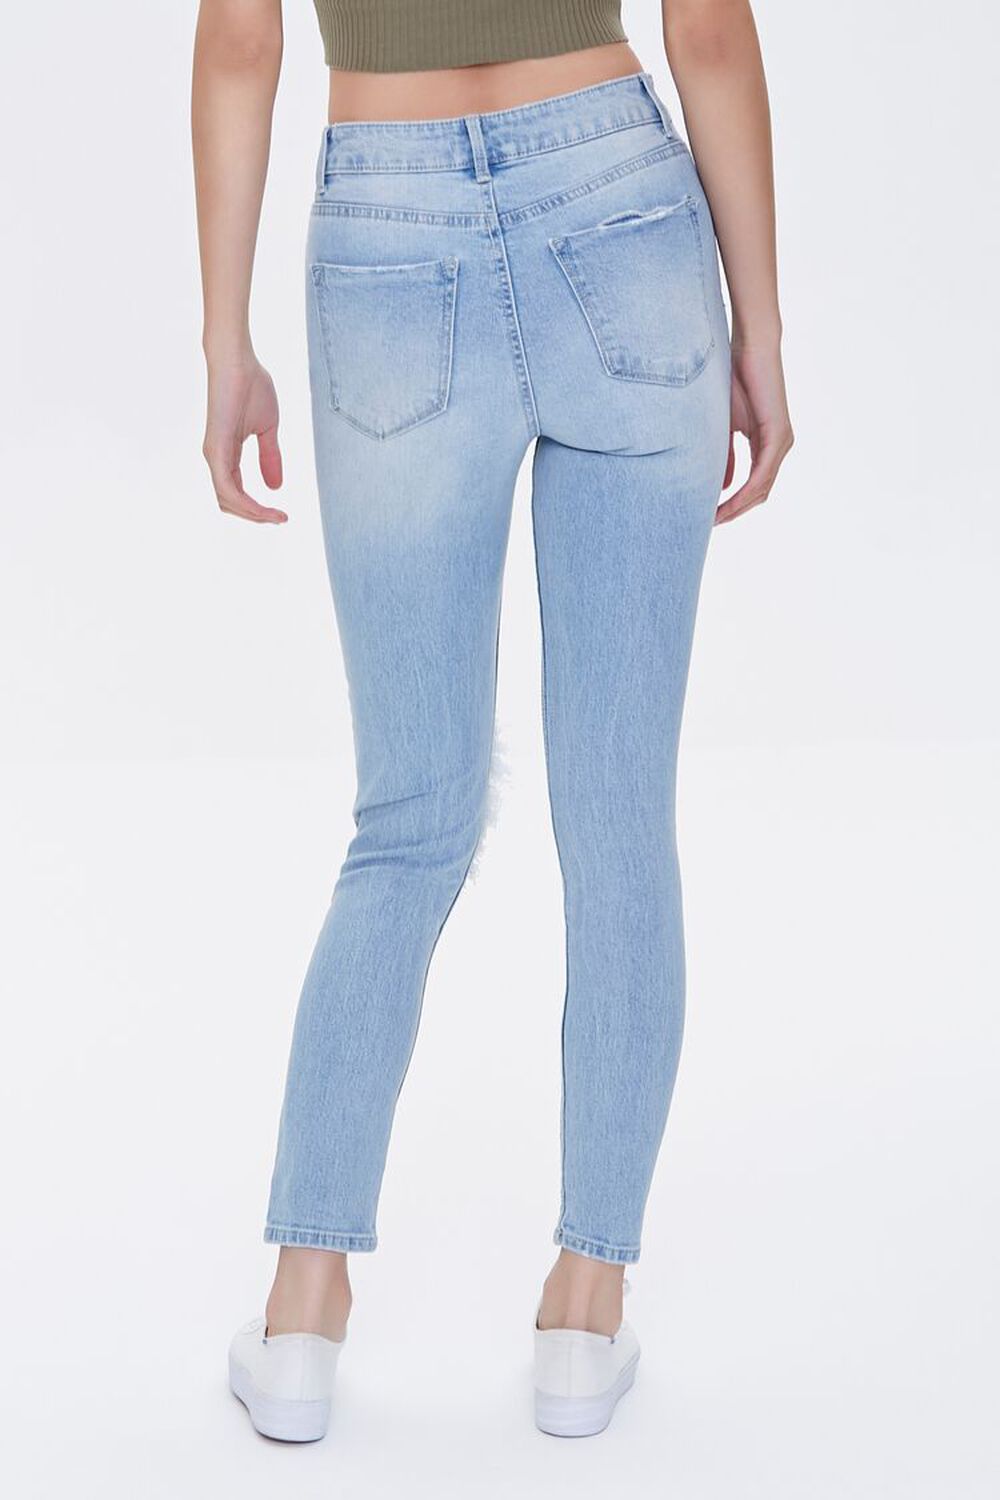 LIGHT DENIM Recycled Cotton 12% High-Rise Skinny Jeans, image 3